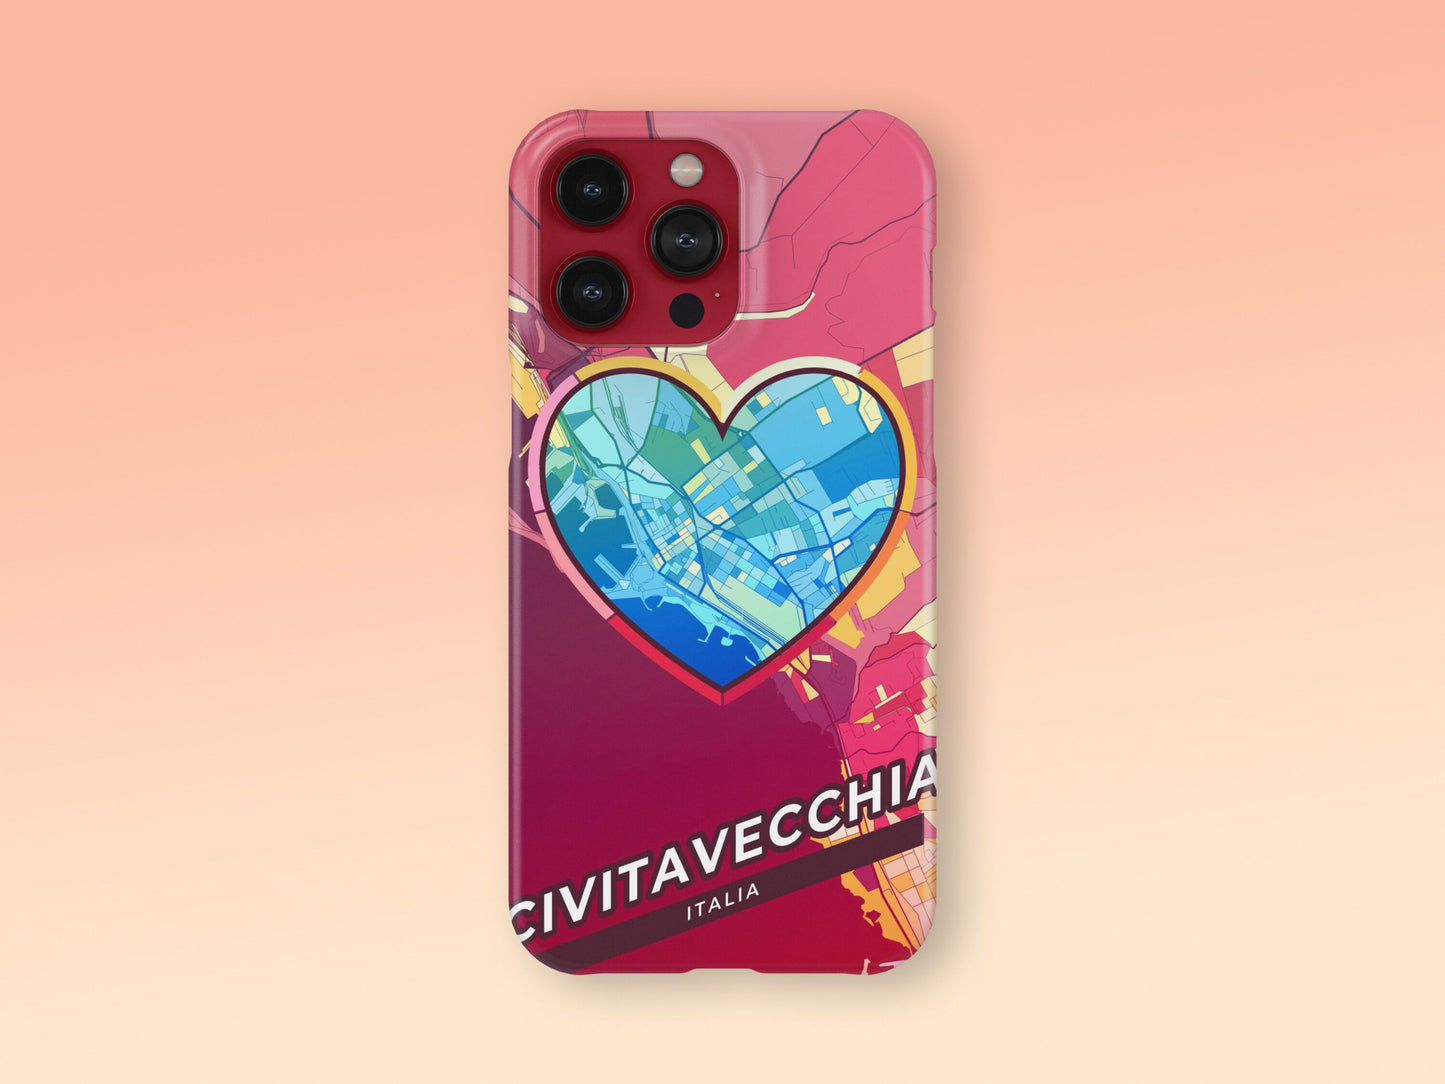 Civitavecchia Italy slim phone case with colorful icon. Birthday, wedding or housewarming gift. Couple match cases. 2